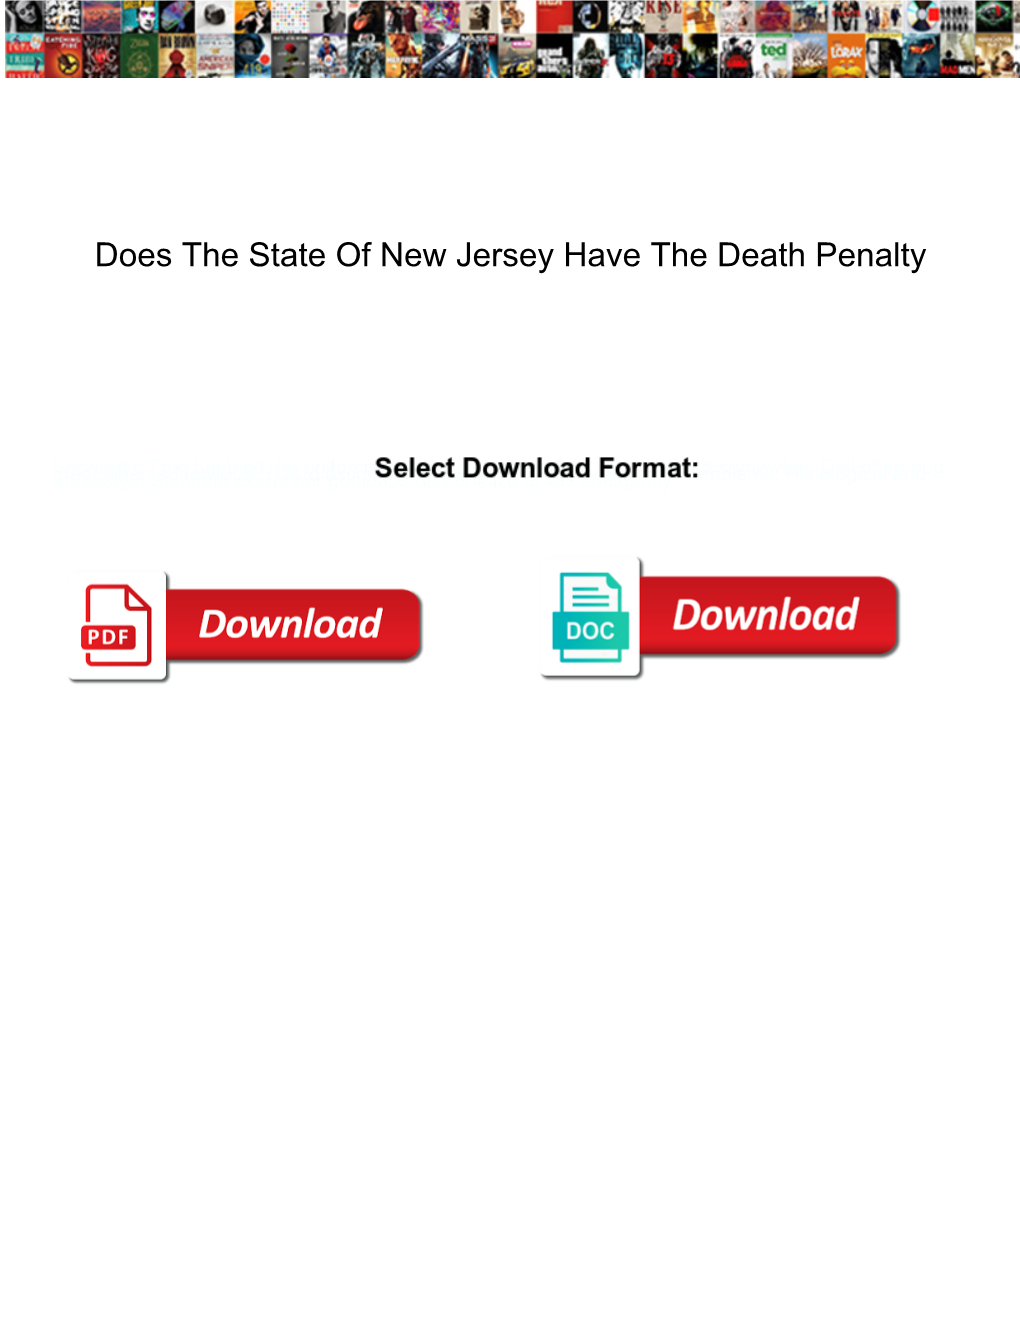 Does the State of New Jersey Have the Death Penalty